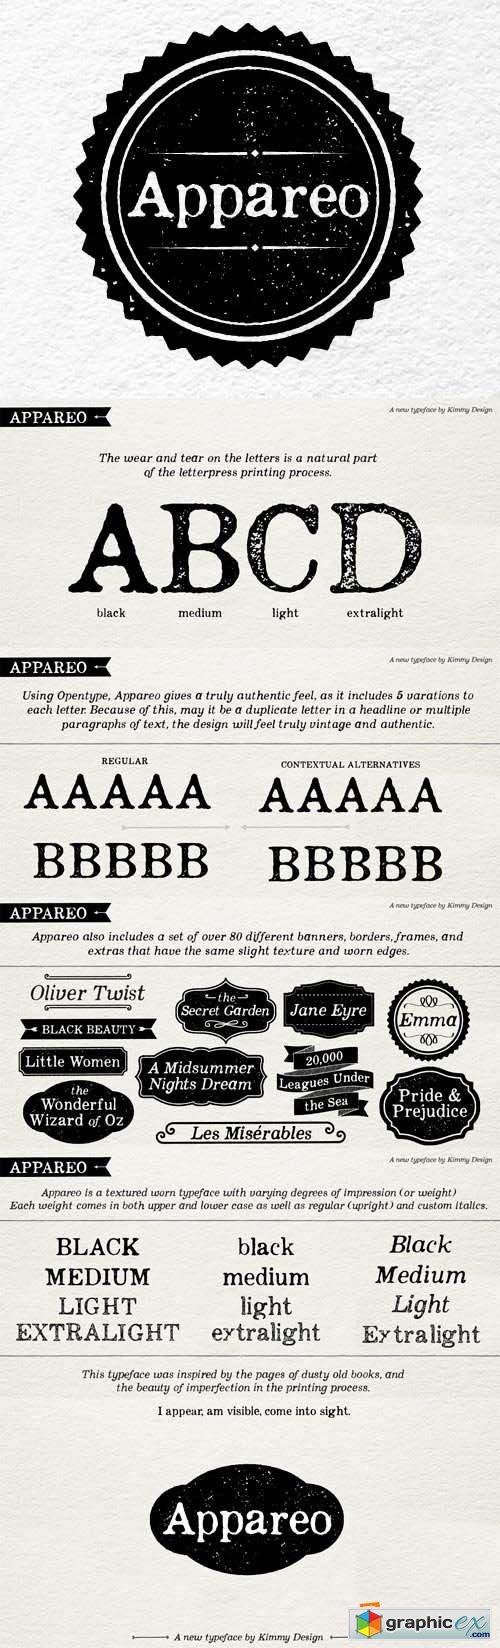 Appareo Font Family - 9 Fonts for $70